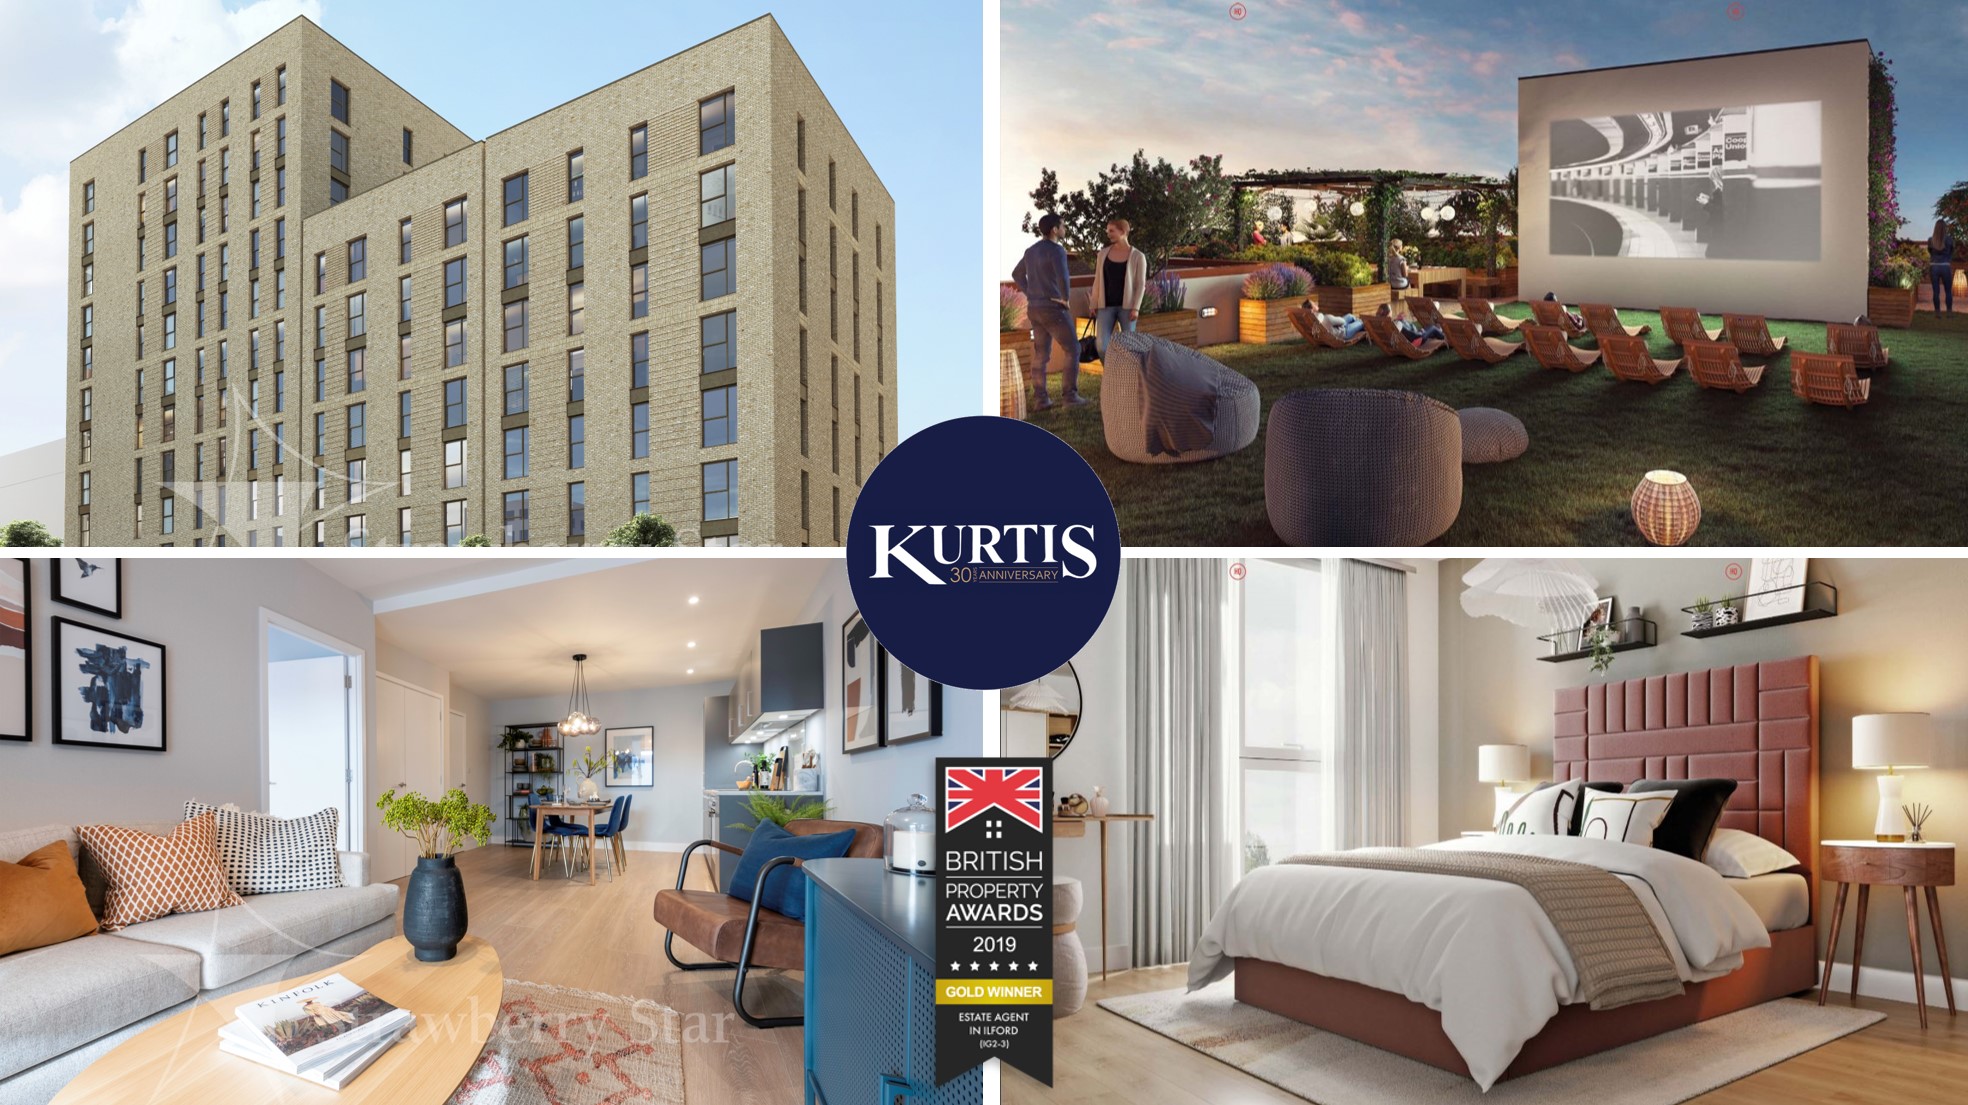 New Homes From Kurtis Property at Harlow Quarter, Harlow, Essex, CM17